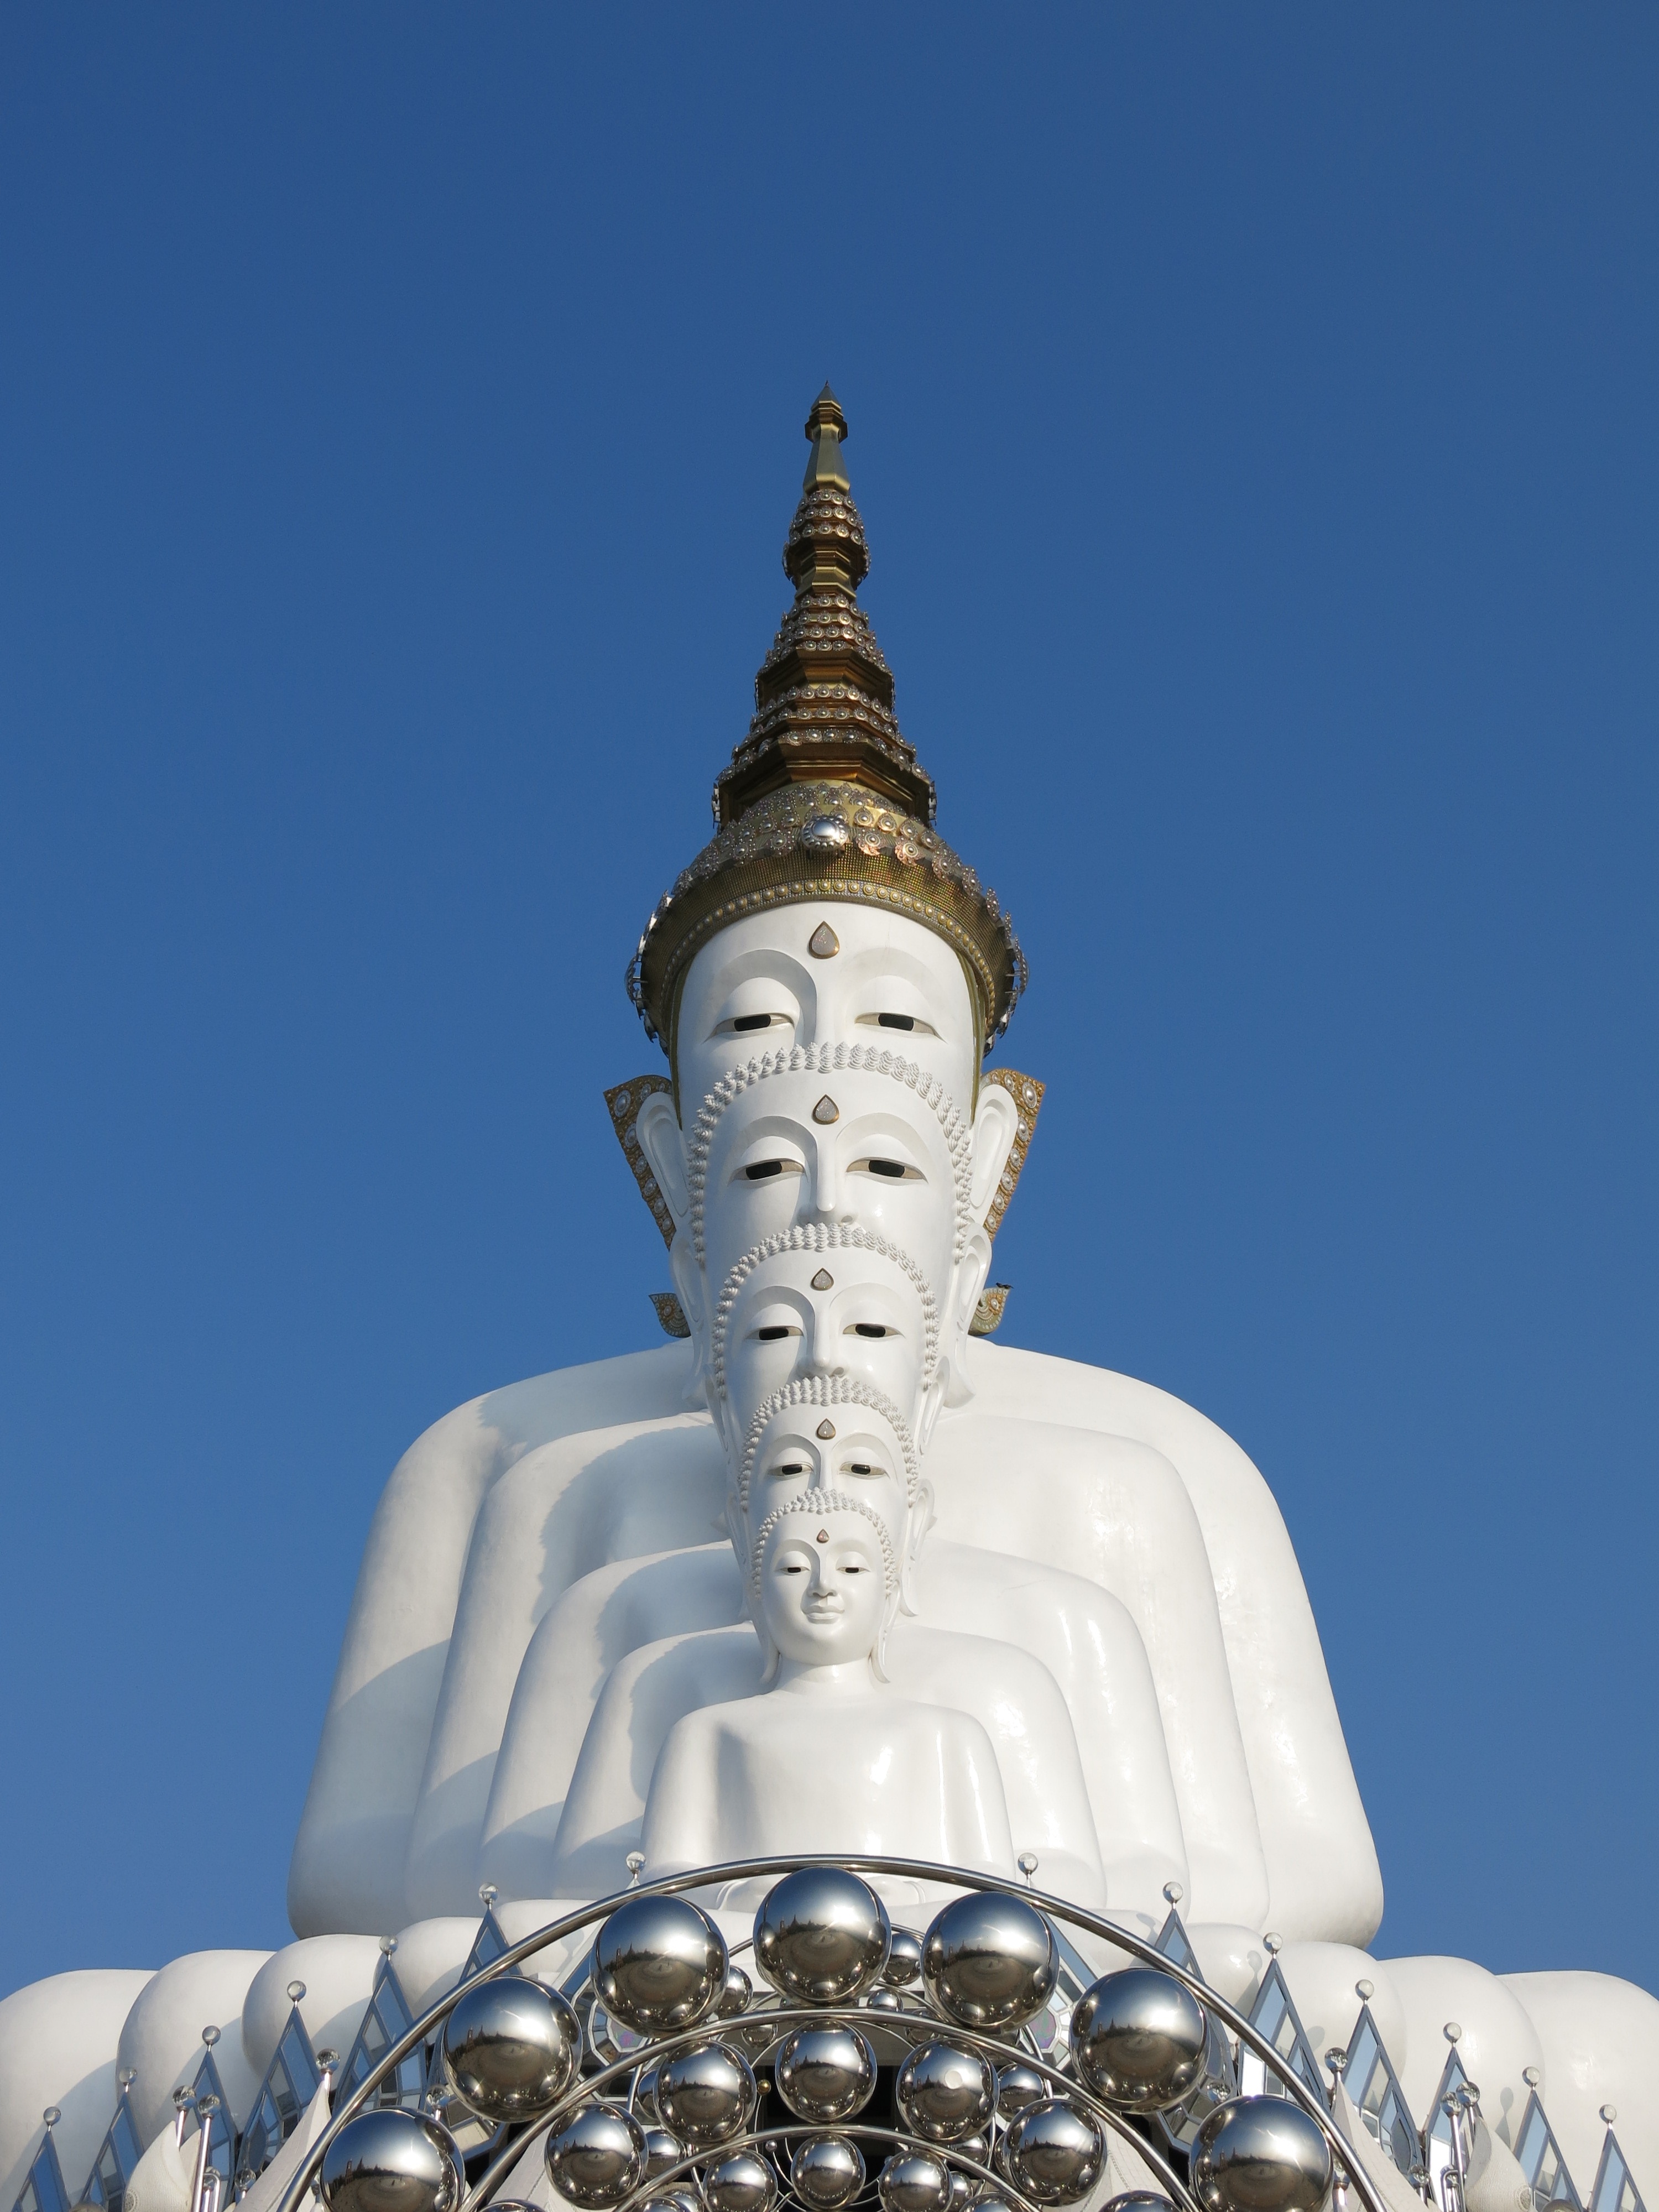 Thailand, Buddhism, Statue, Buddha, space exploration, science